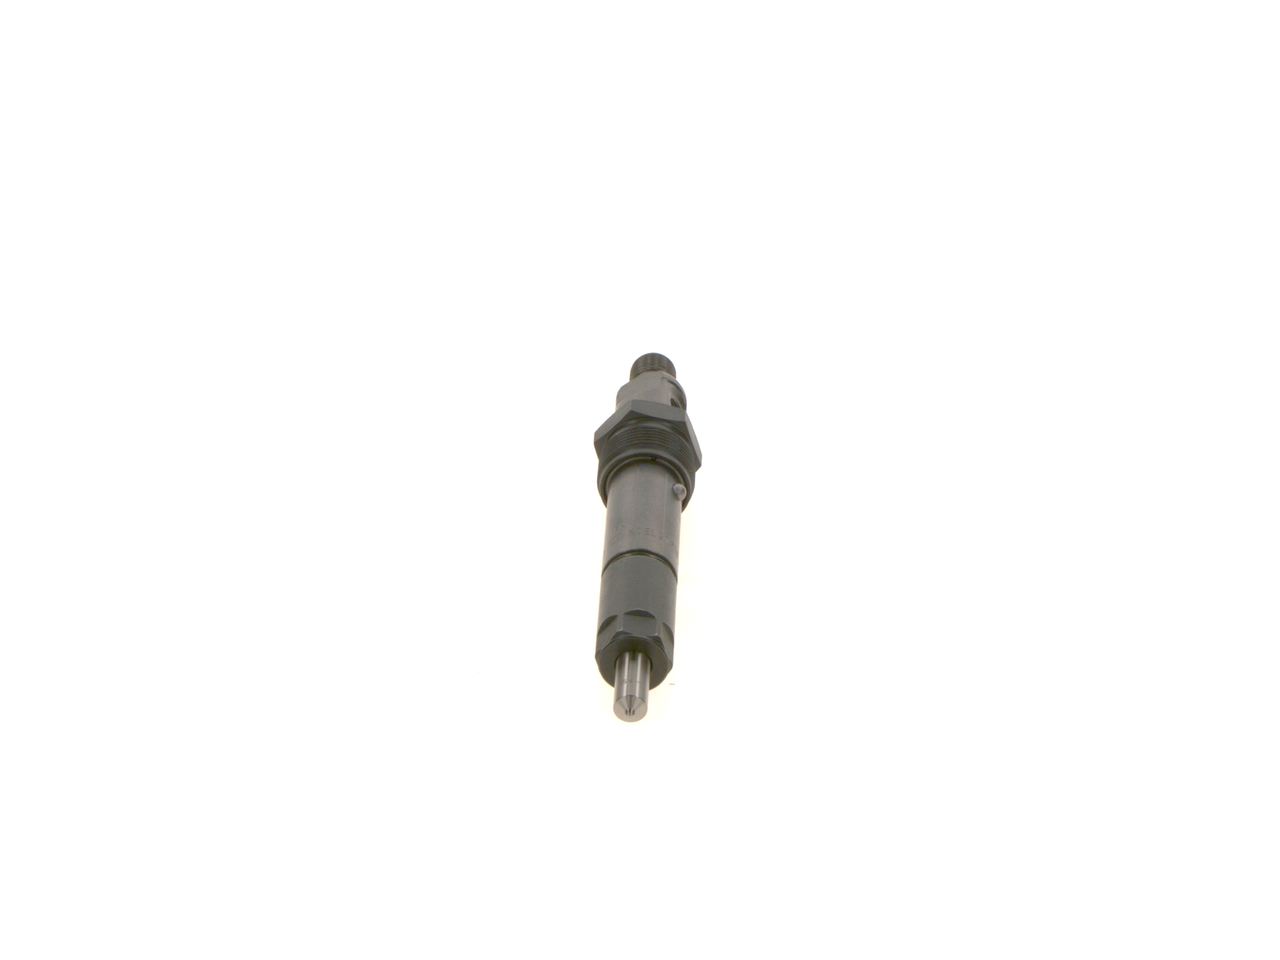 BOSCH 0 432 131 871 Nozzle and Holder Assembly